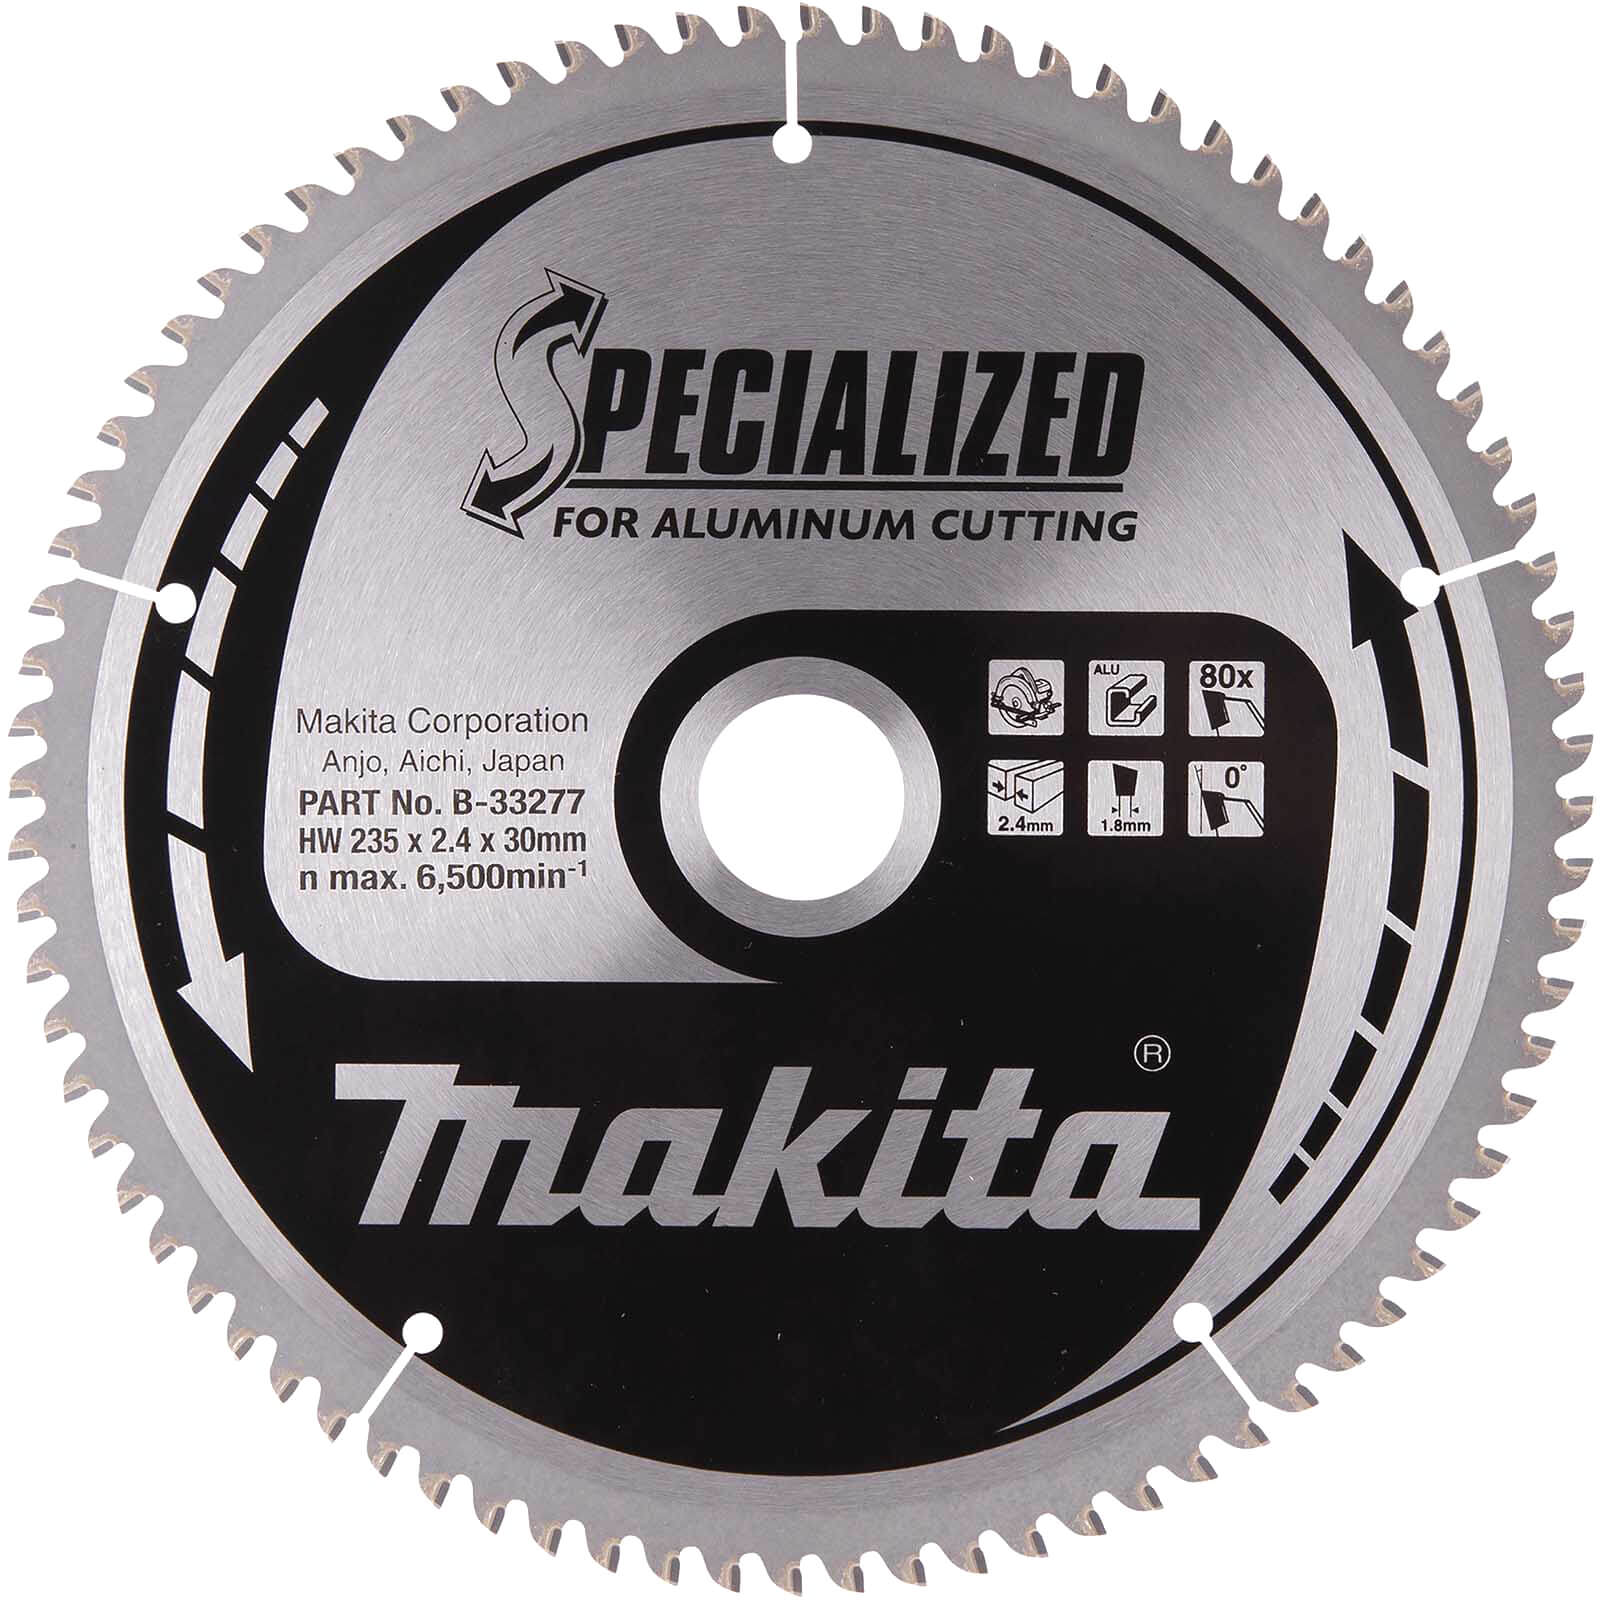 Photos - Power Tool Accessory Makita SPECIALIZED Circular Saw Blade for Aluminium Cutting 235mm 80T 30mm 